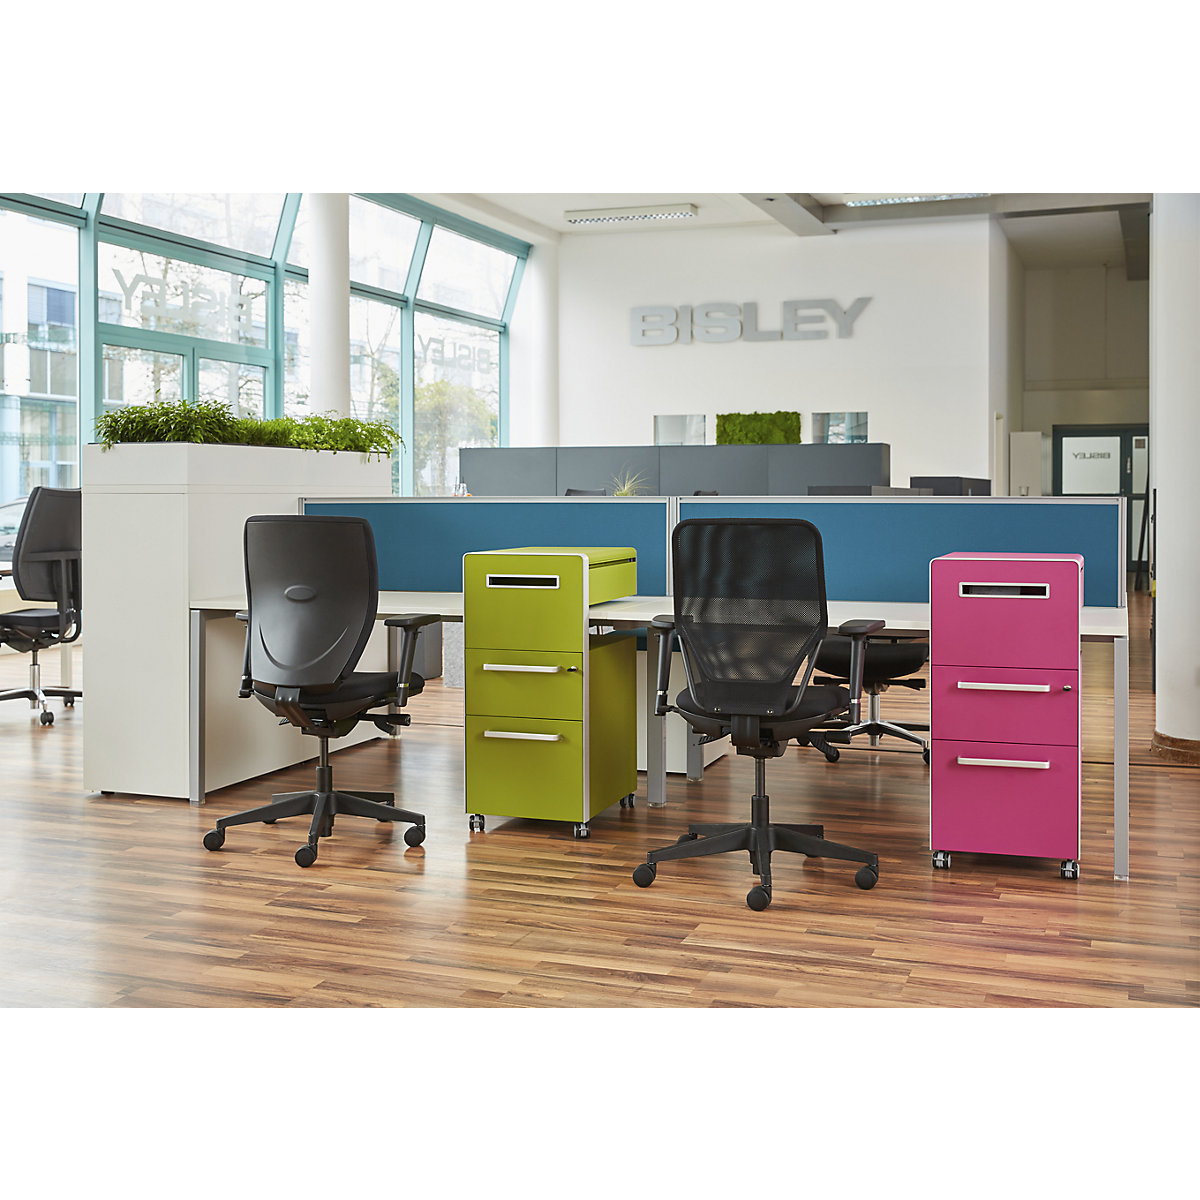 Bite™ pedestal furniture, with 1 pin board, opens on the left side – BISLEY (Product illustration 36)-35